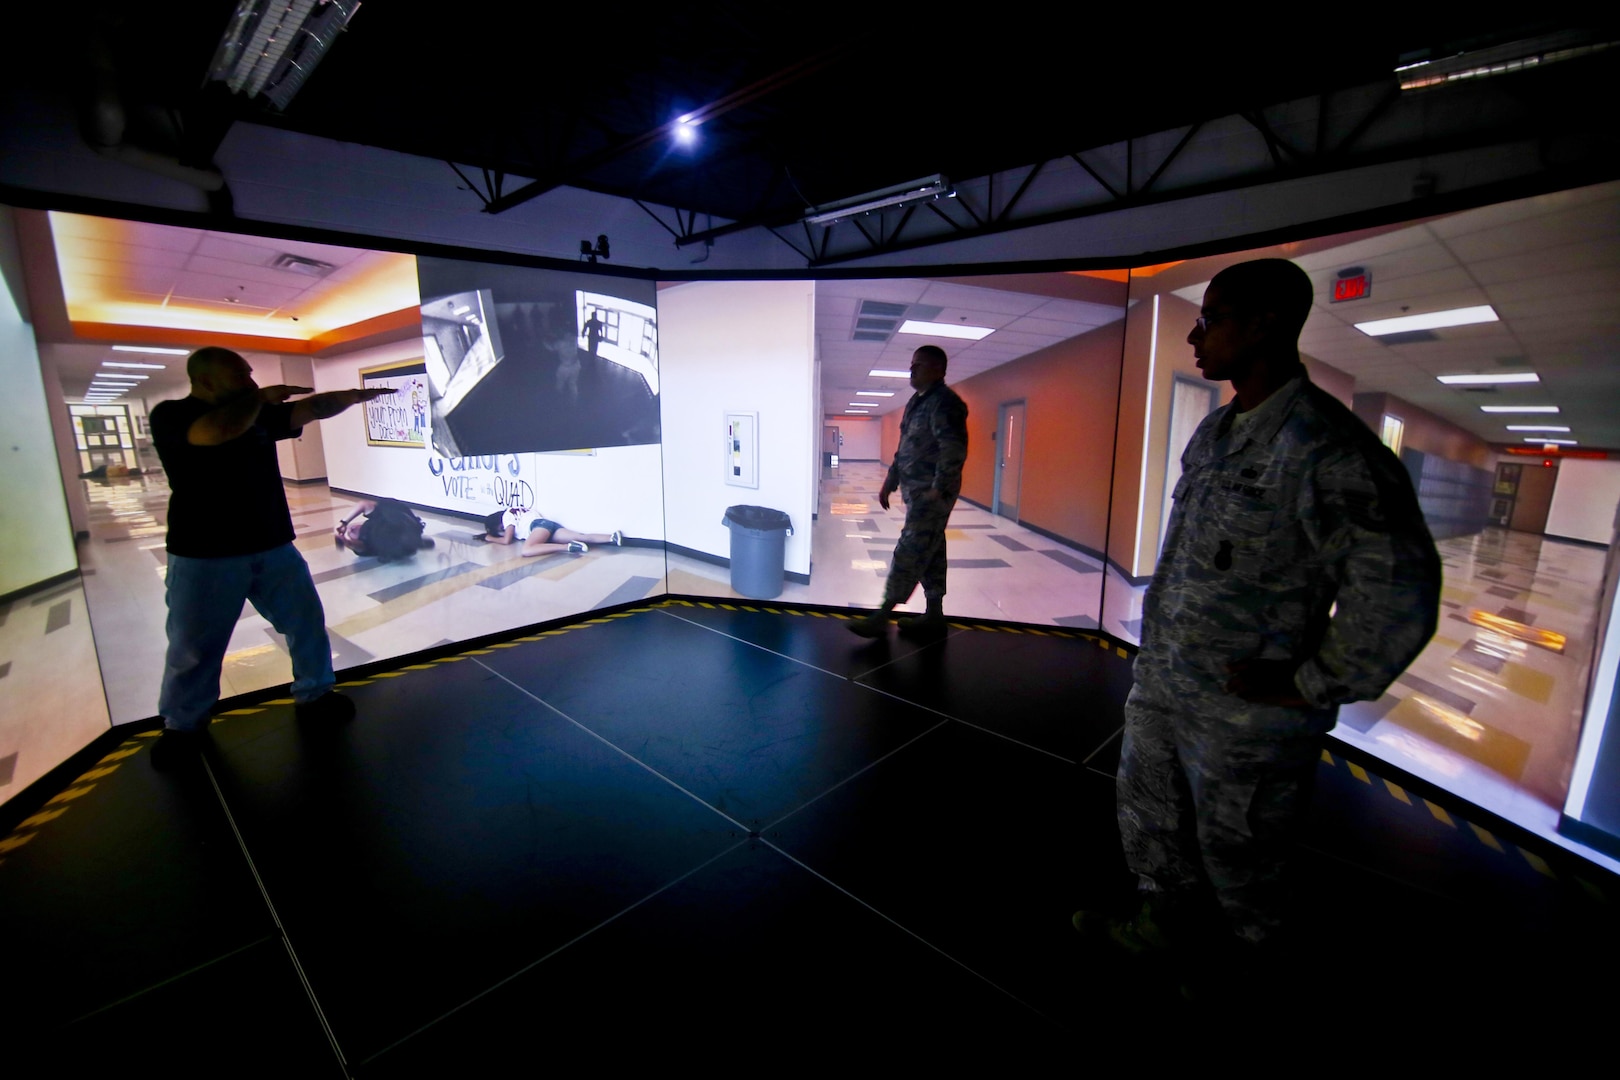 A U.S Air Force Security Forces Airman from the New Jersey Air National Guard's 108th Wing gets feedback from a U.S. Marshal instructor in a firearms training simulator at a U.S. Marshal training site in Lawrenceville, New Jersey, on Dec. 12, 2015. 